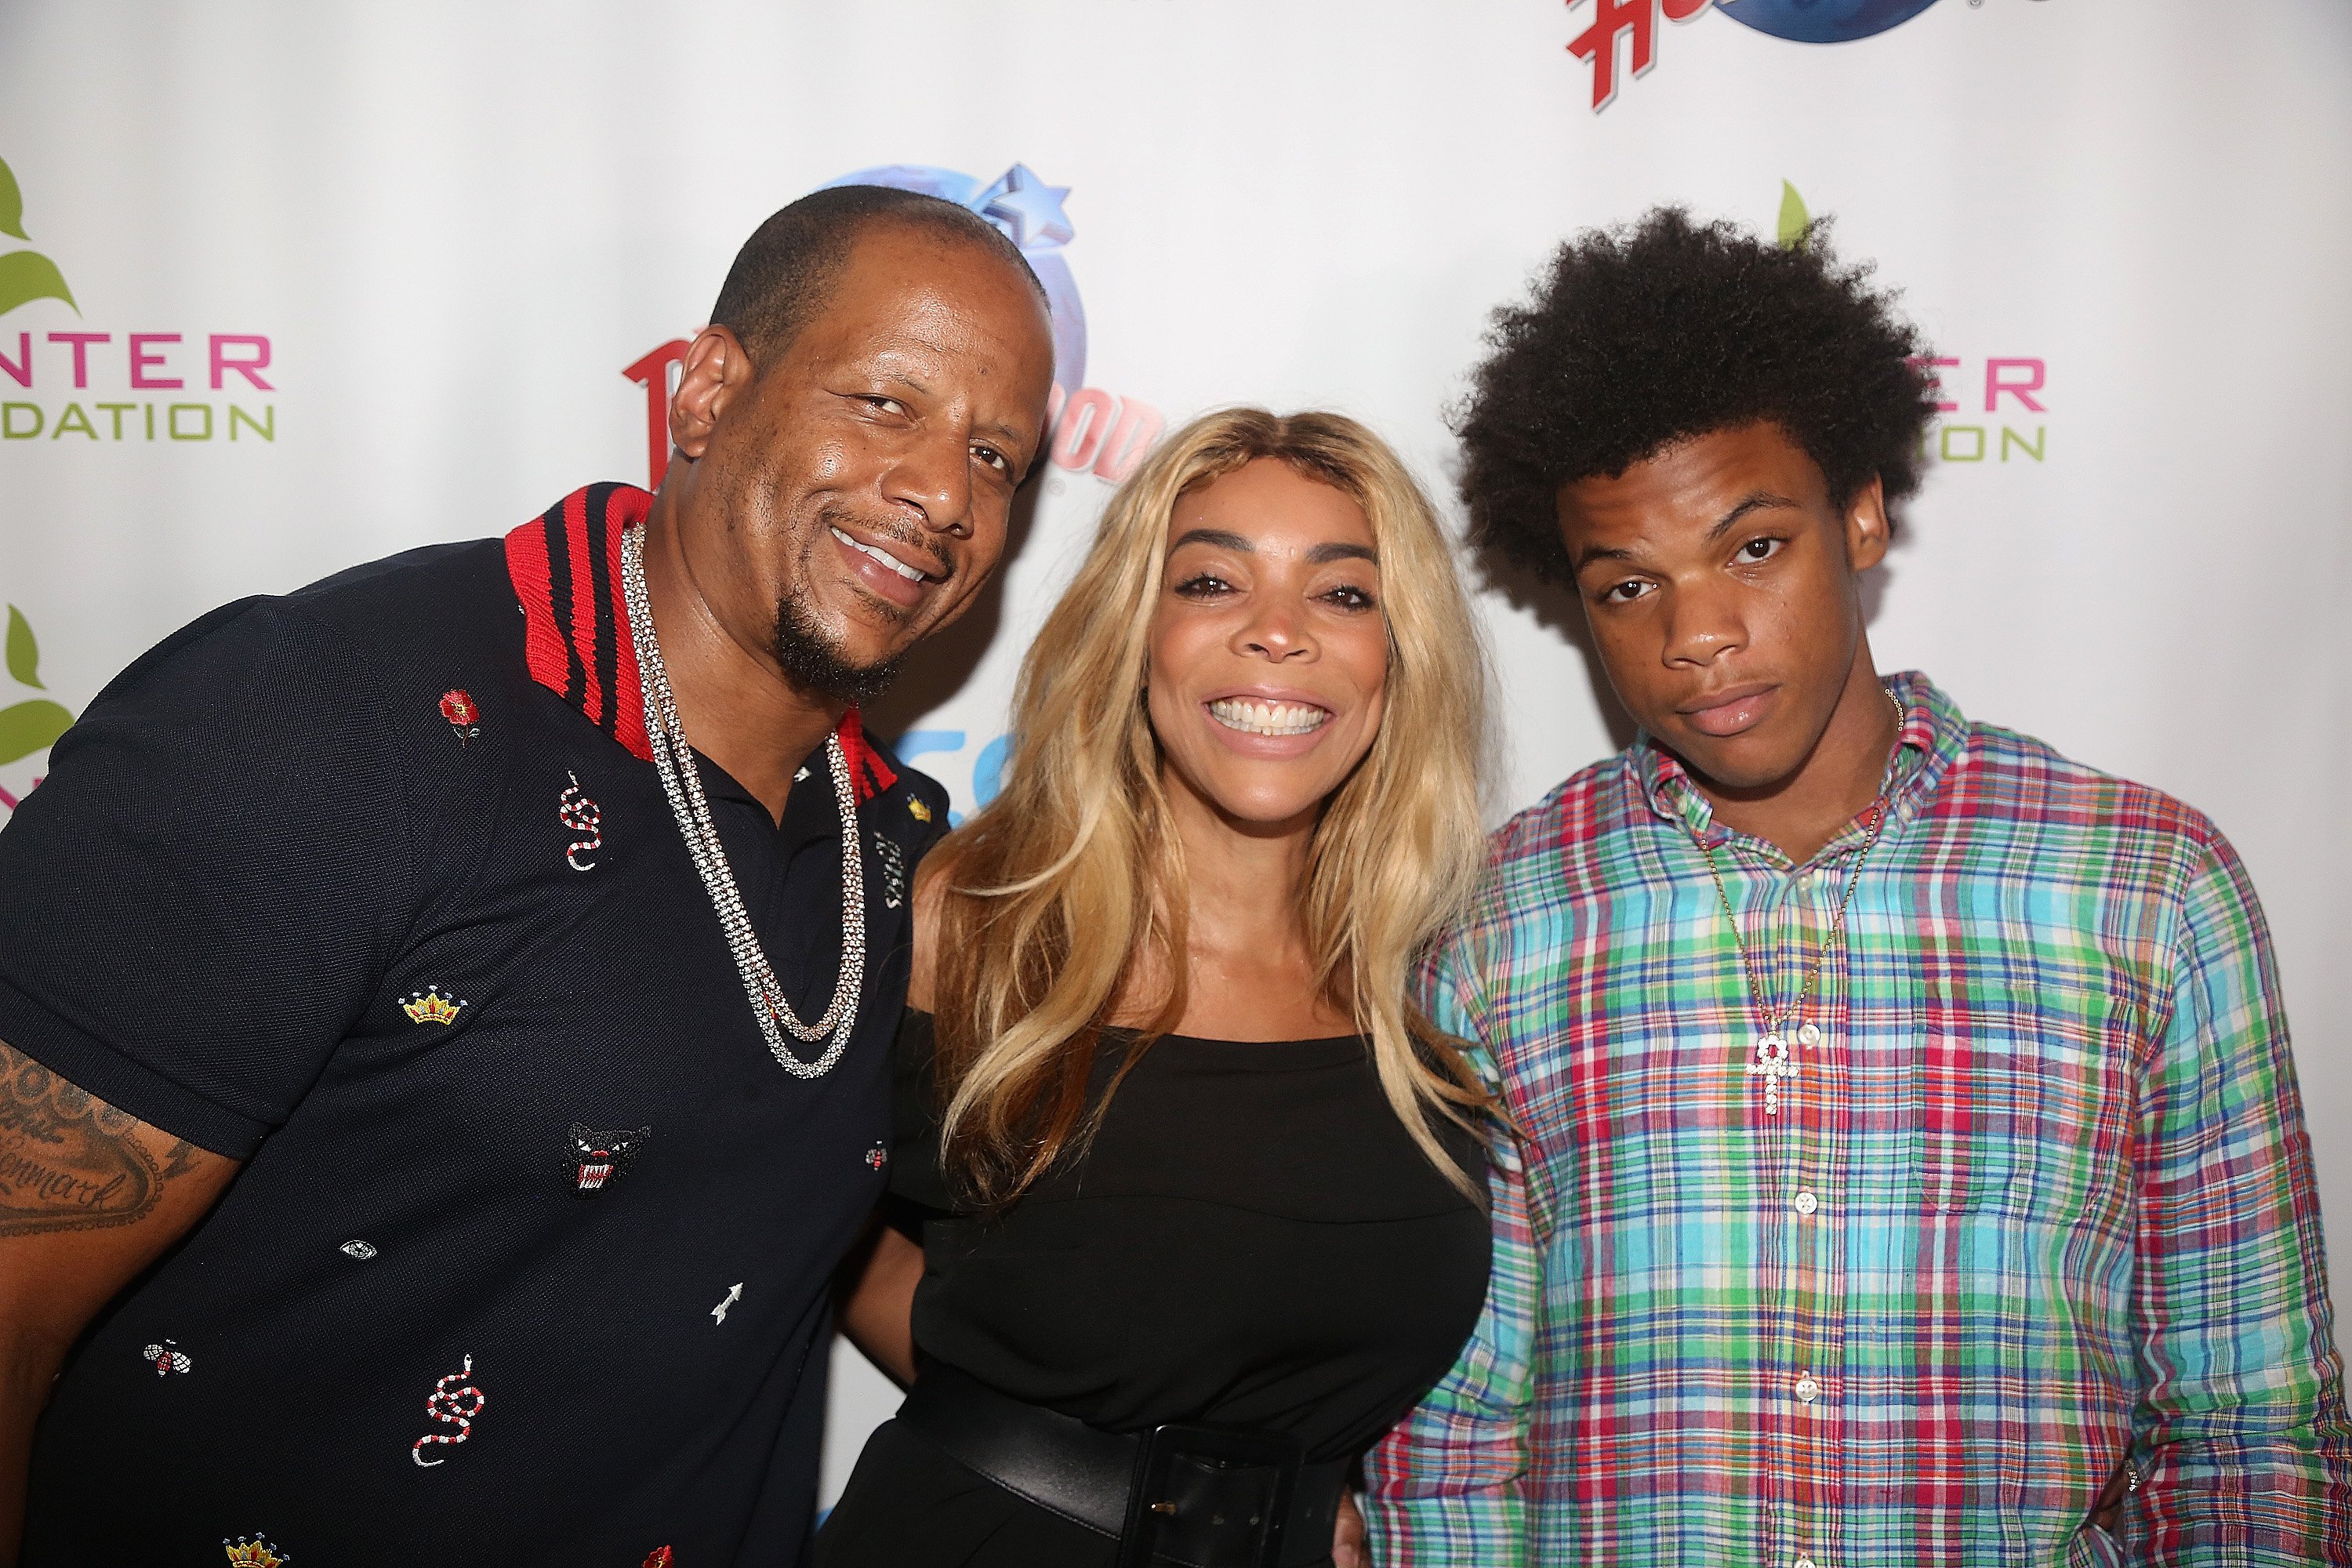 Kevin Hunter, Wendy Williams, and their son, Kevin Hunter Jr.